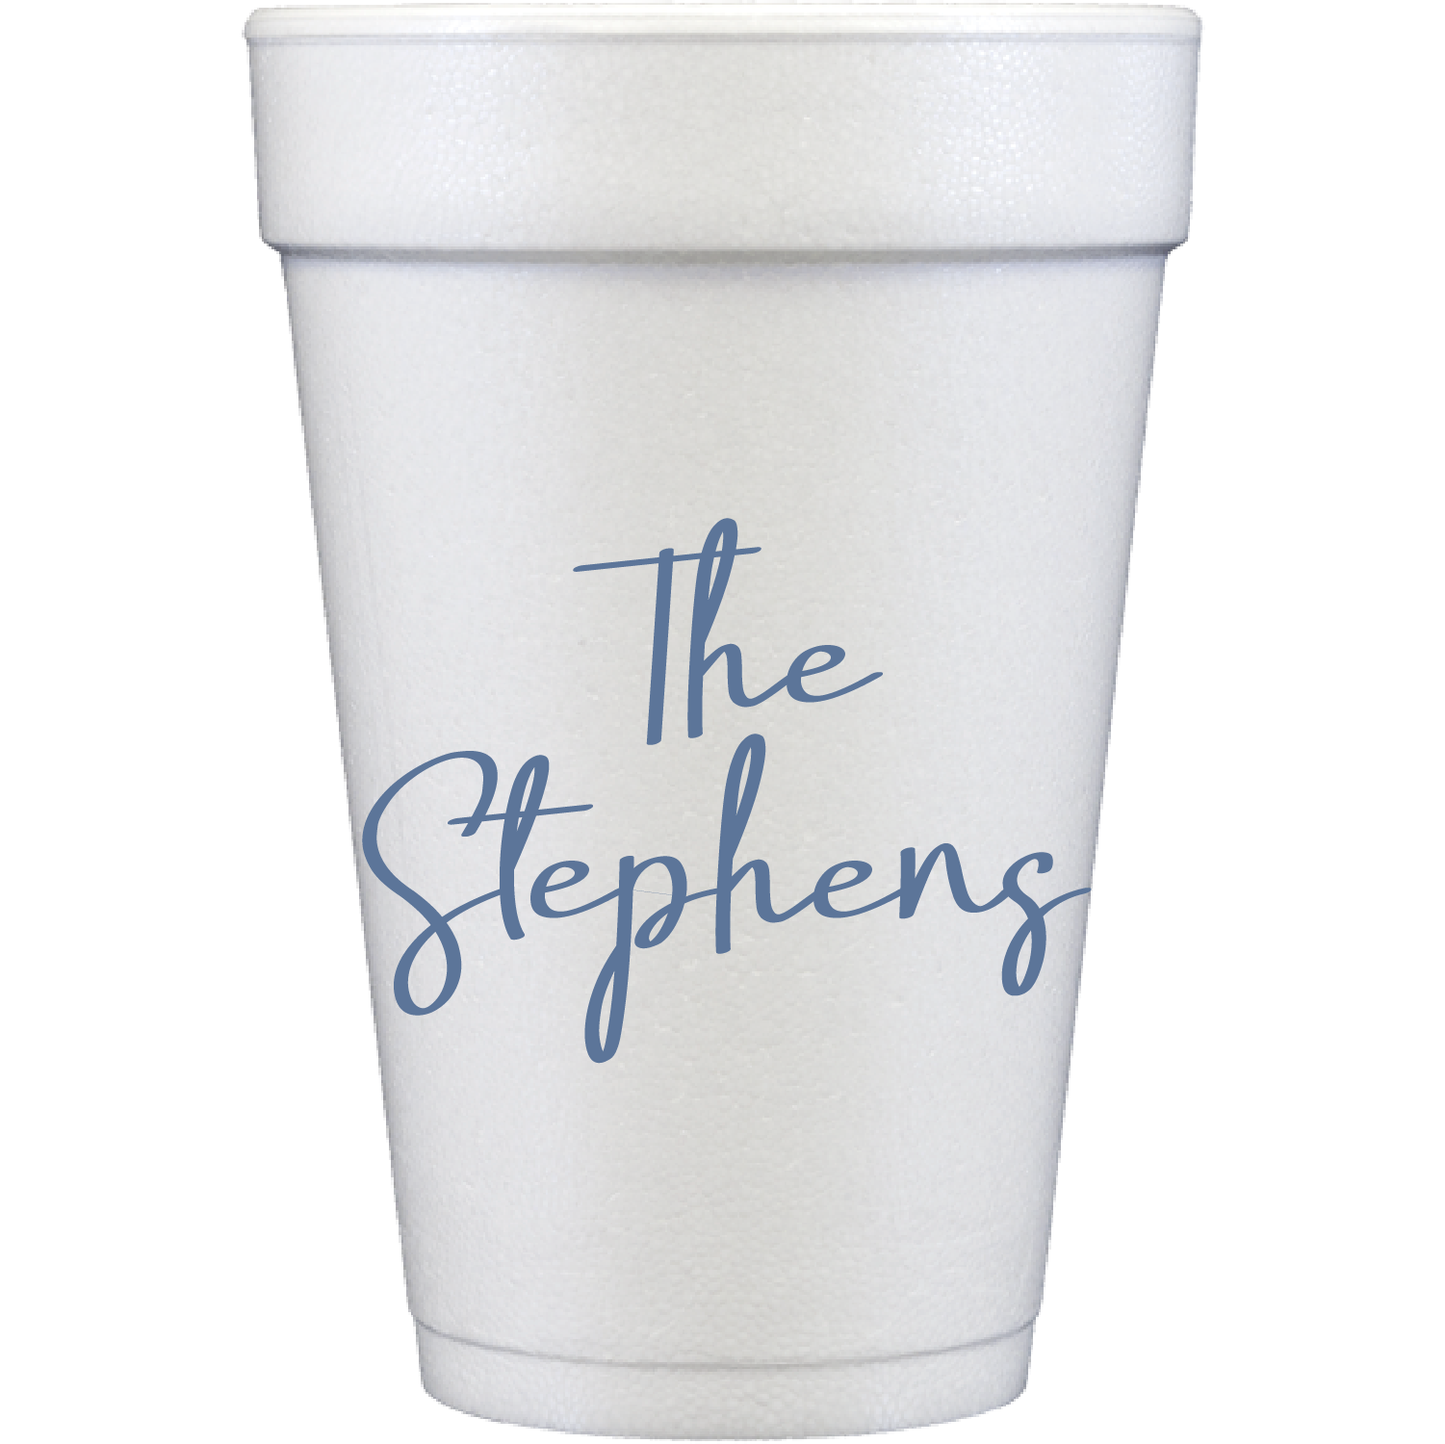 the name 7 | styrofoam cups